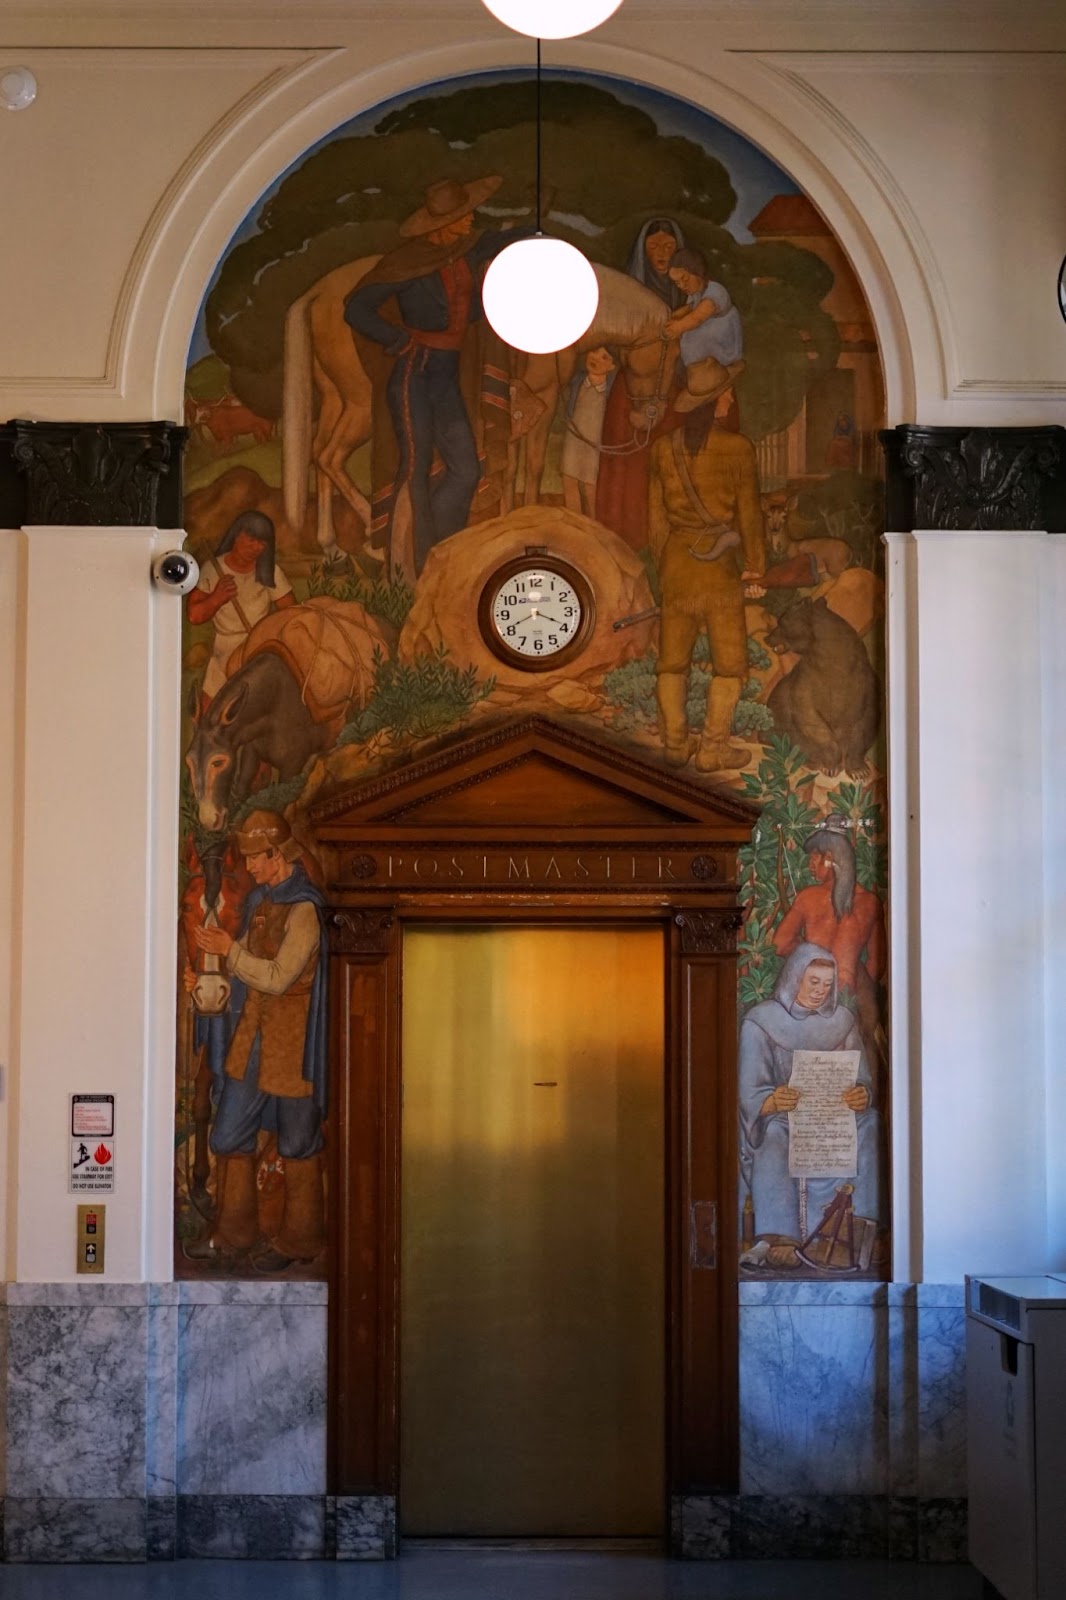 A detailed mural over the wall above an elevator. It depicts a complex scene. There is one bear on the right side. 